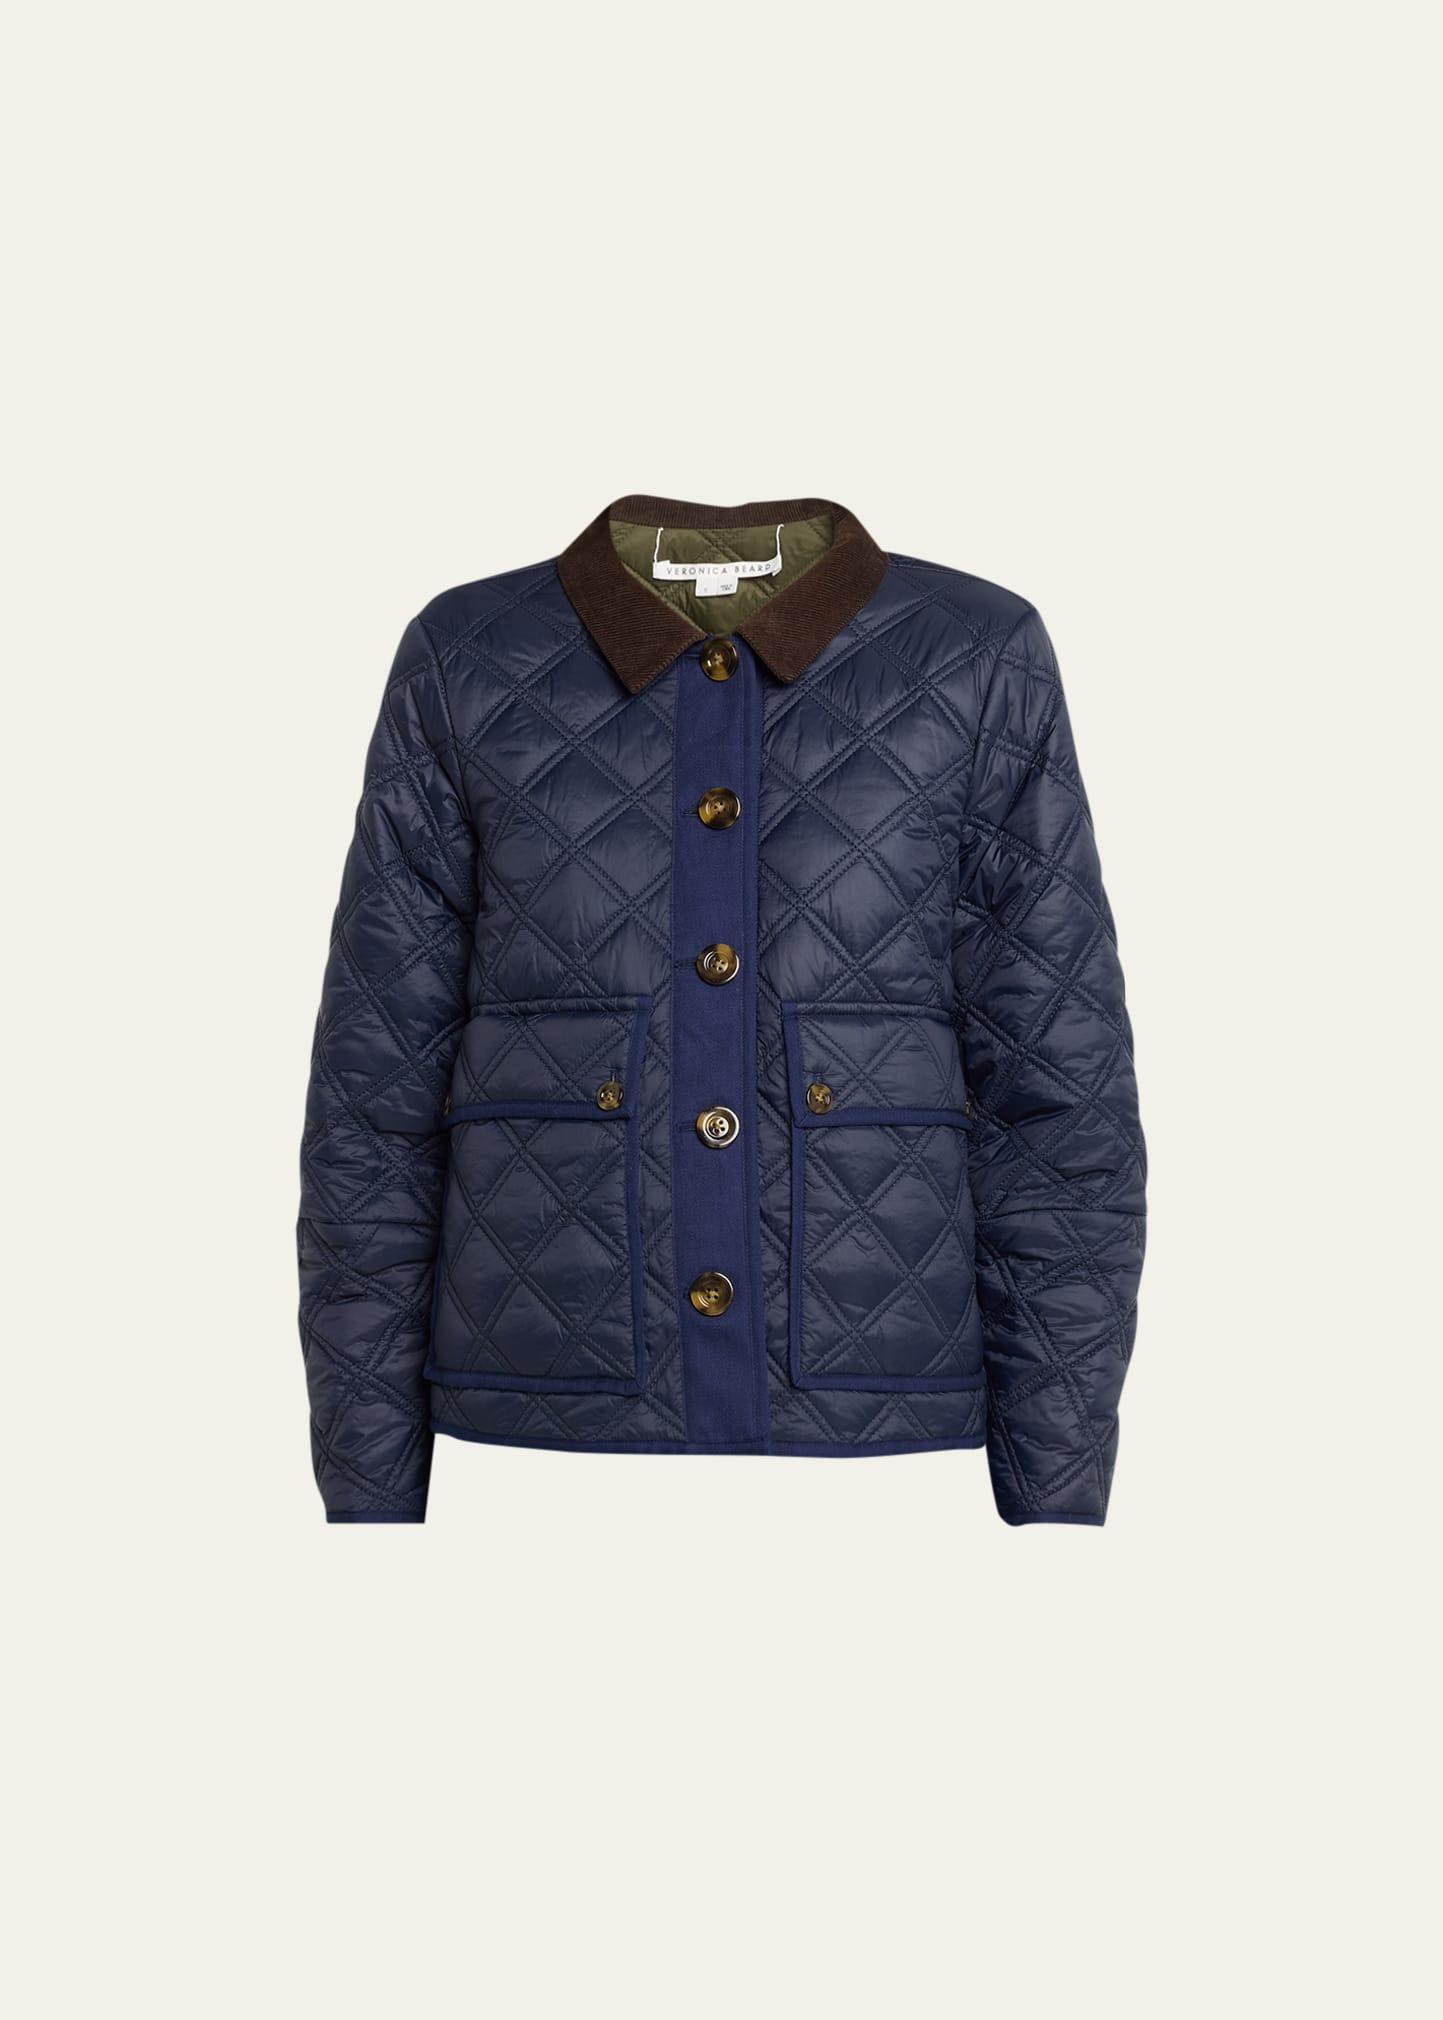 Veronica Beard Fenton Reversible Quilted Jacket in Blue | Lyst